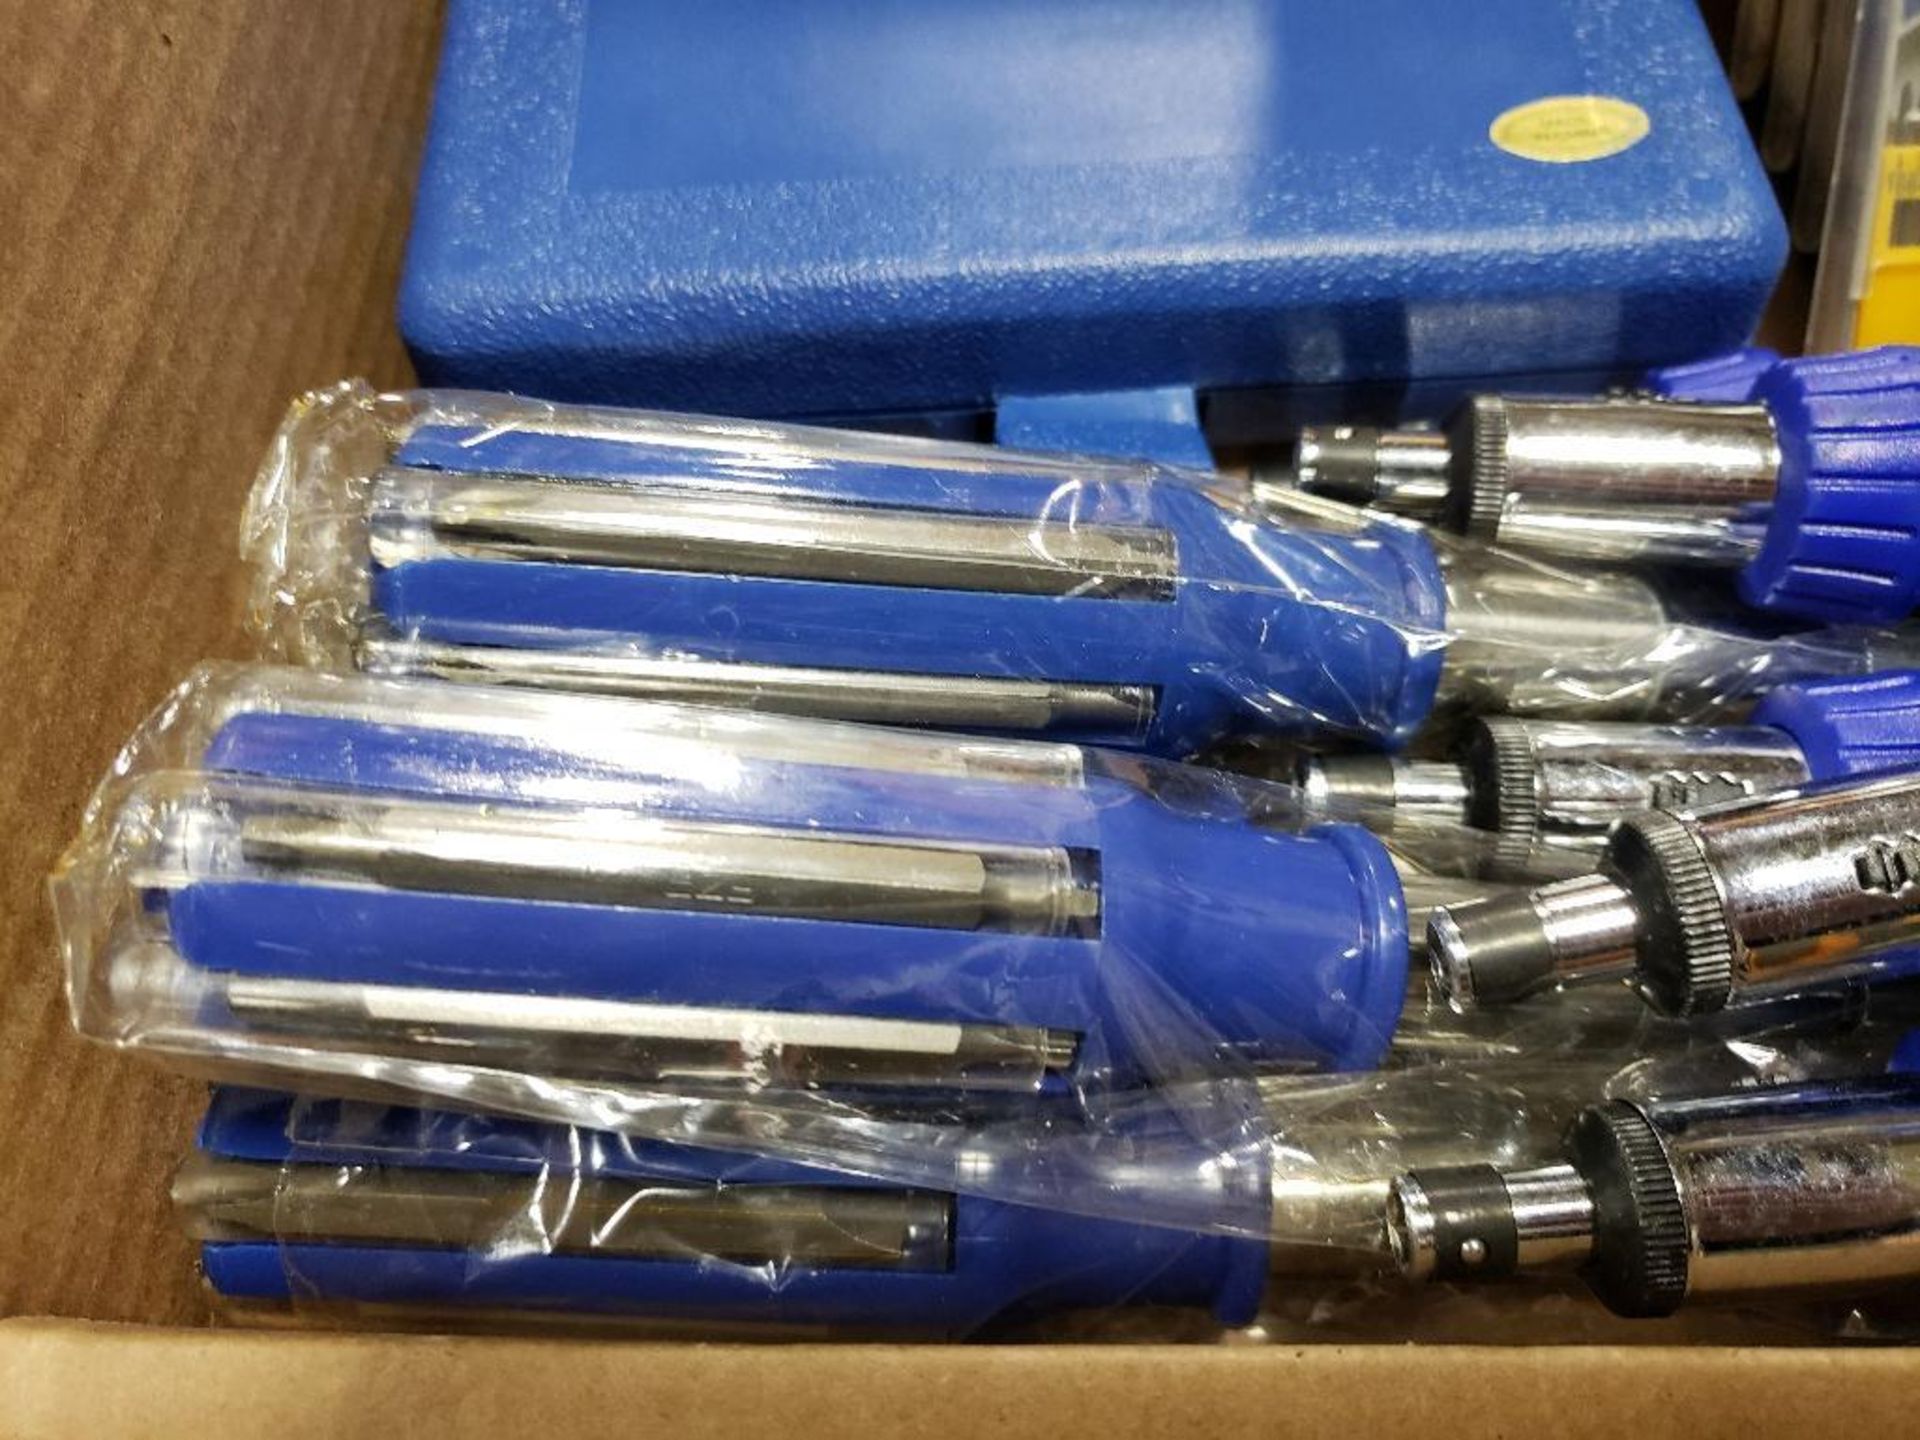 Large assortment of drill bit, screw driver, and bit sets. New as pictured. - Image 4 of 5